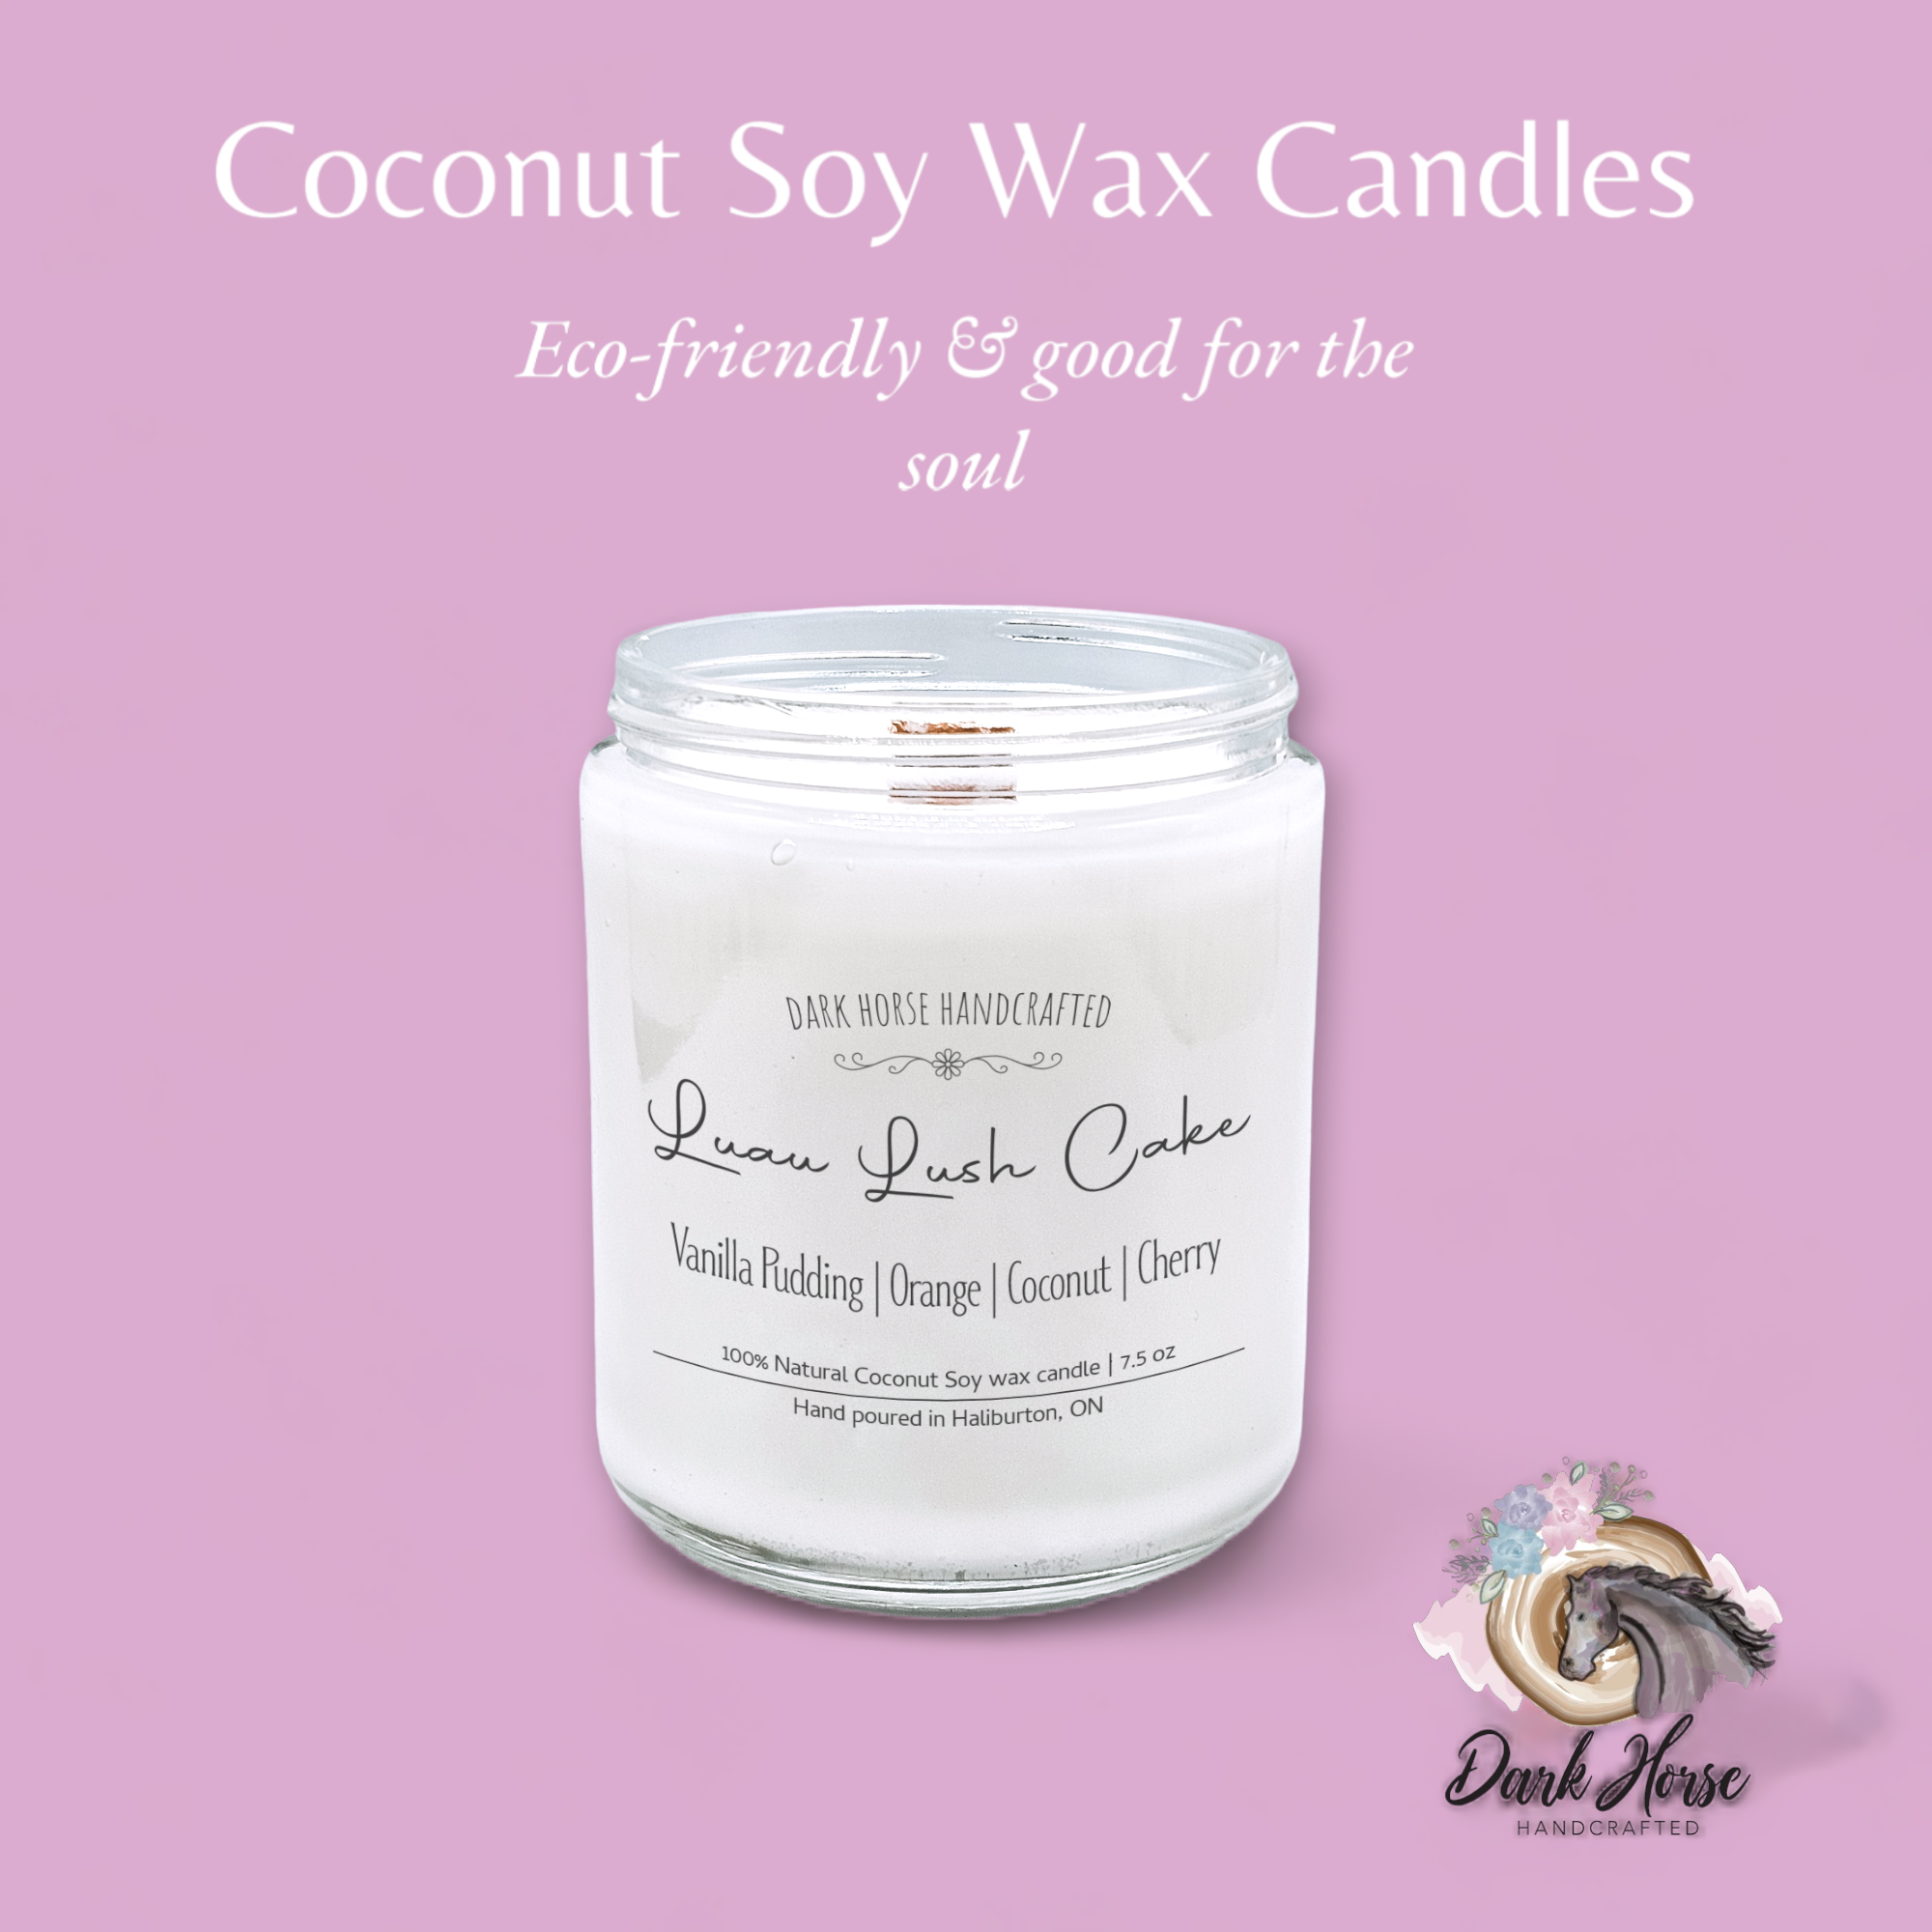 Luau Lush Cake candle on pink background with title of Coconut Soy Wax candles - eco-friendly & good for the soul